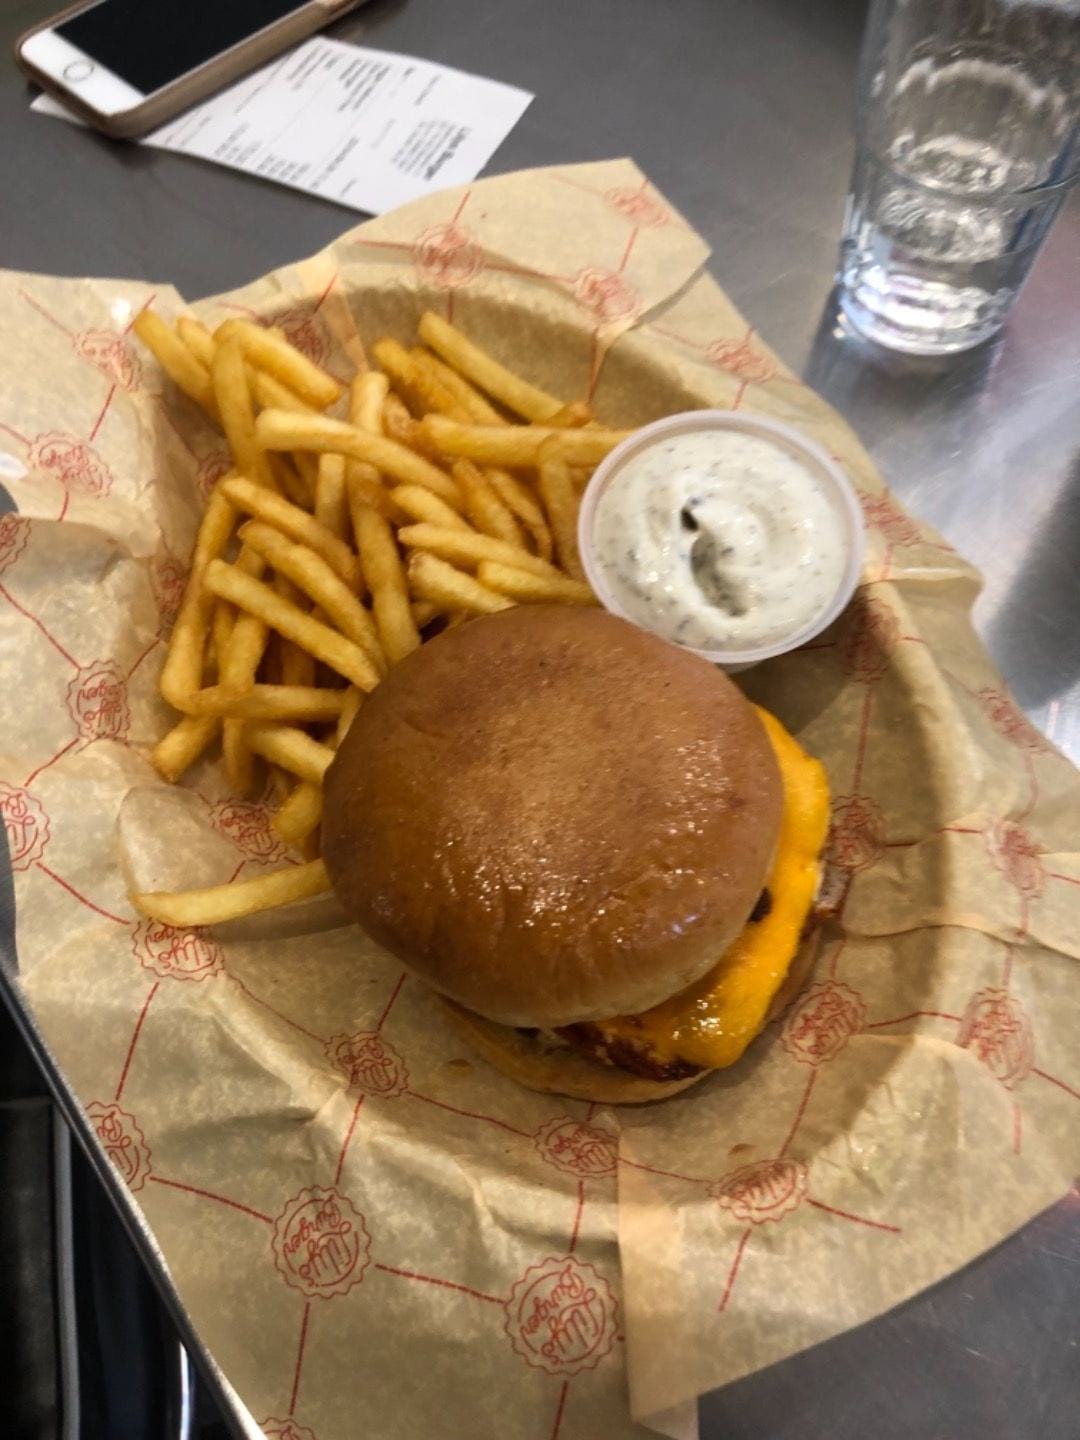 Halloumiburgare – Photo from Lily's Burger Nytorget by Elin E. (30/09/2019)